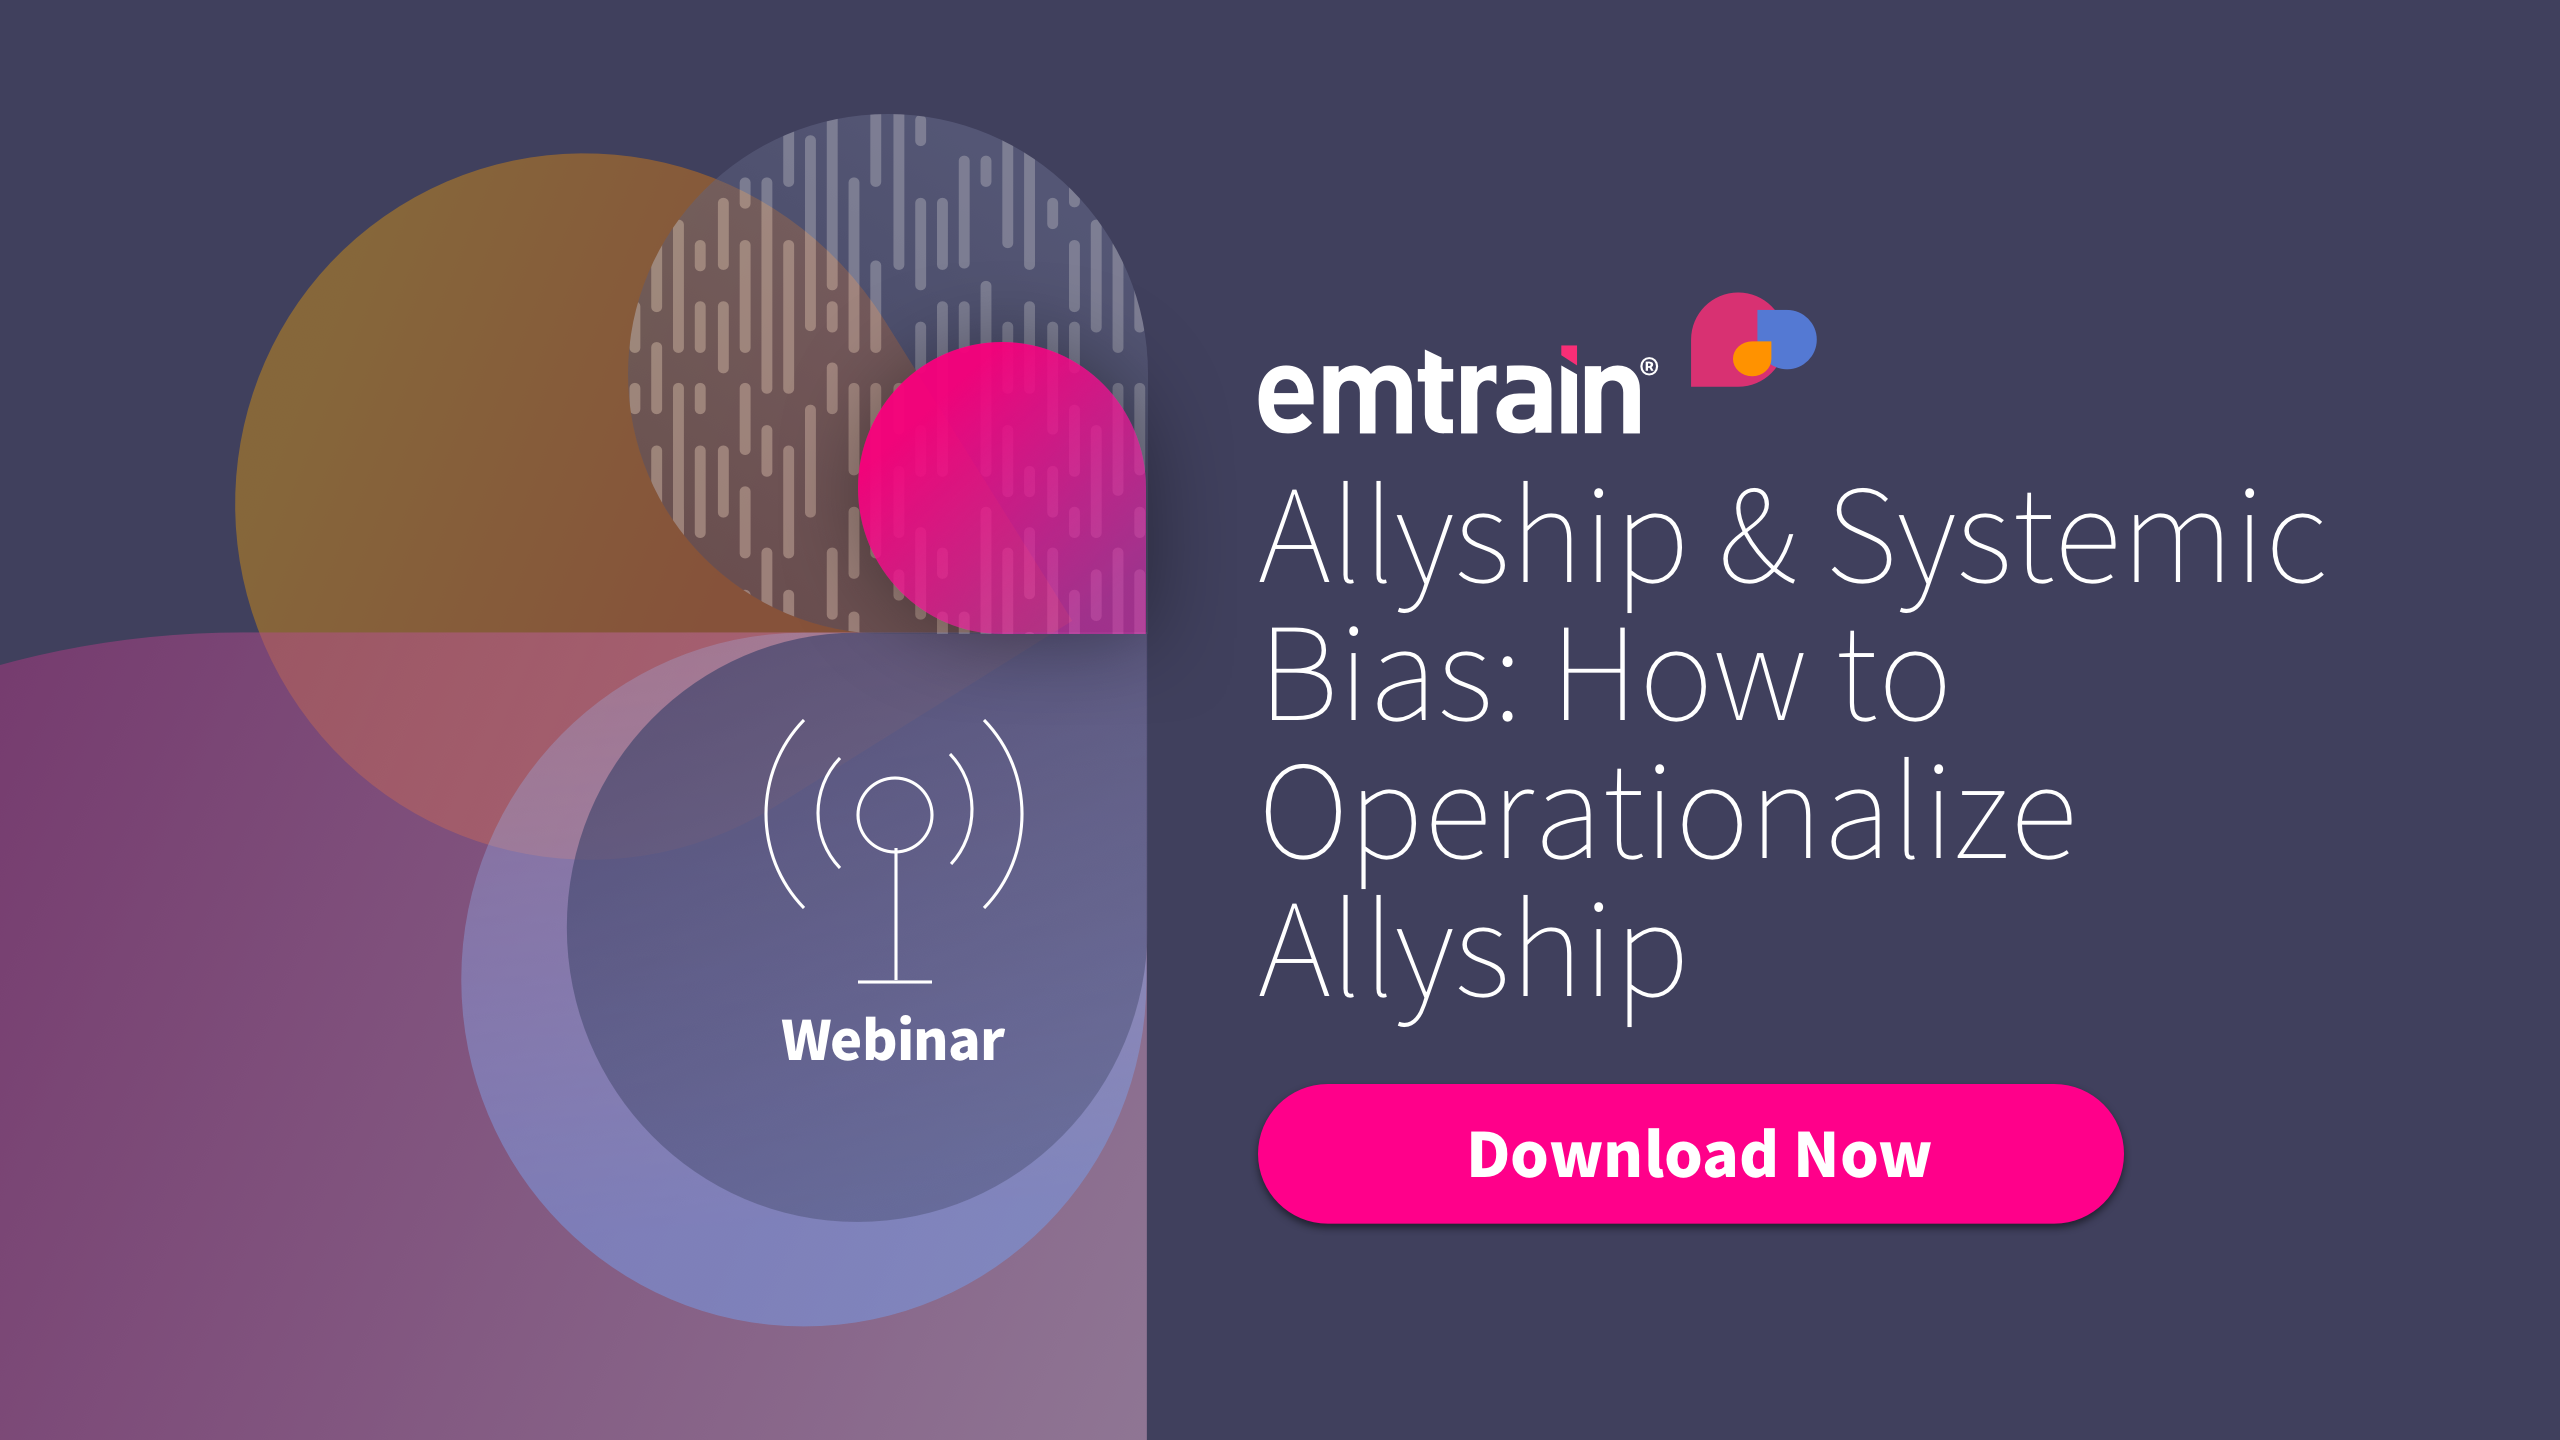 Allyship & Systemic Bias: How to Operationalize Allyship